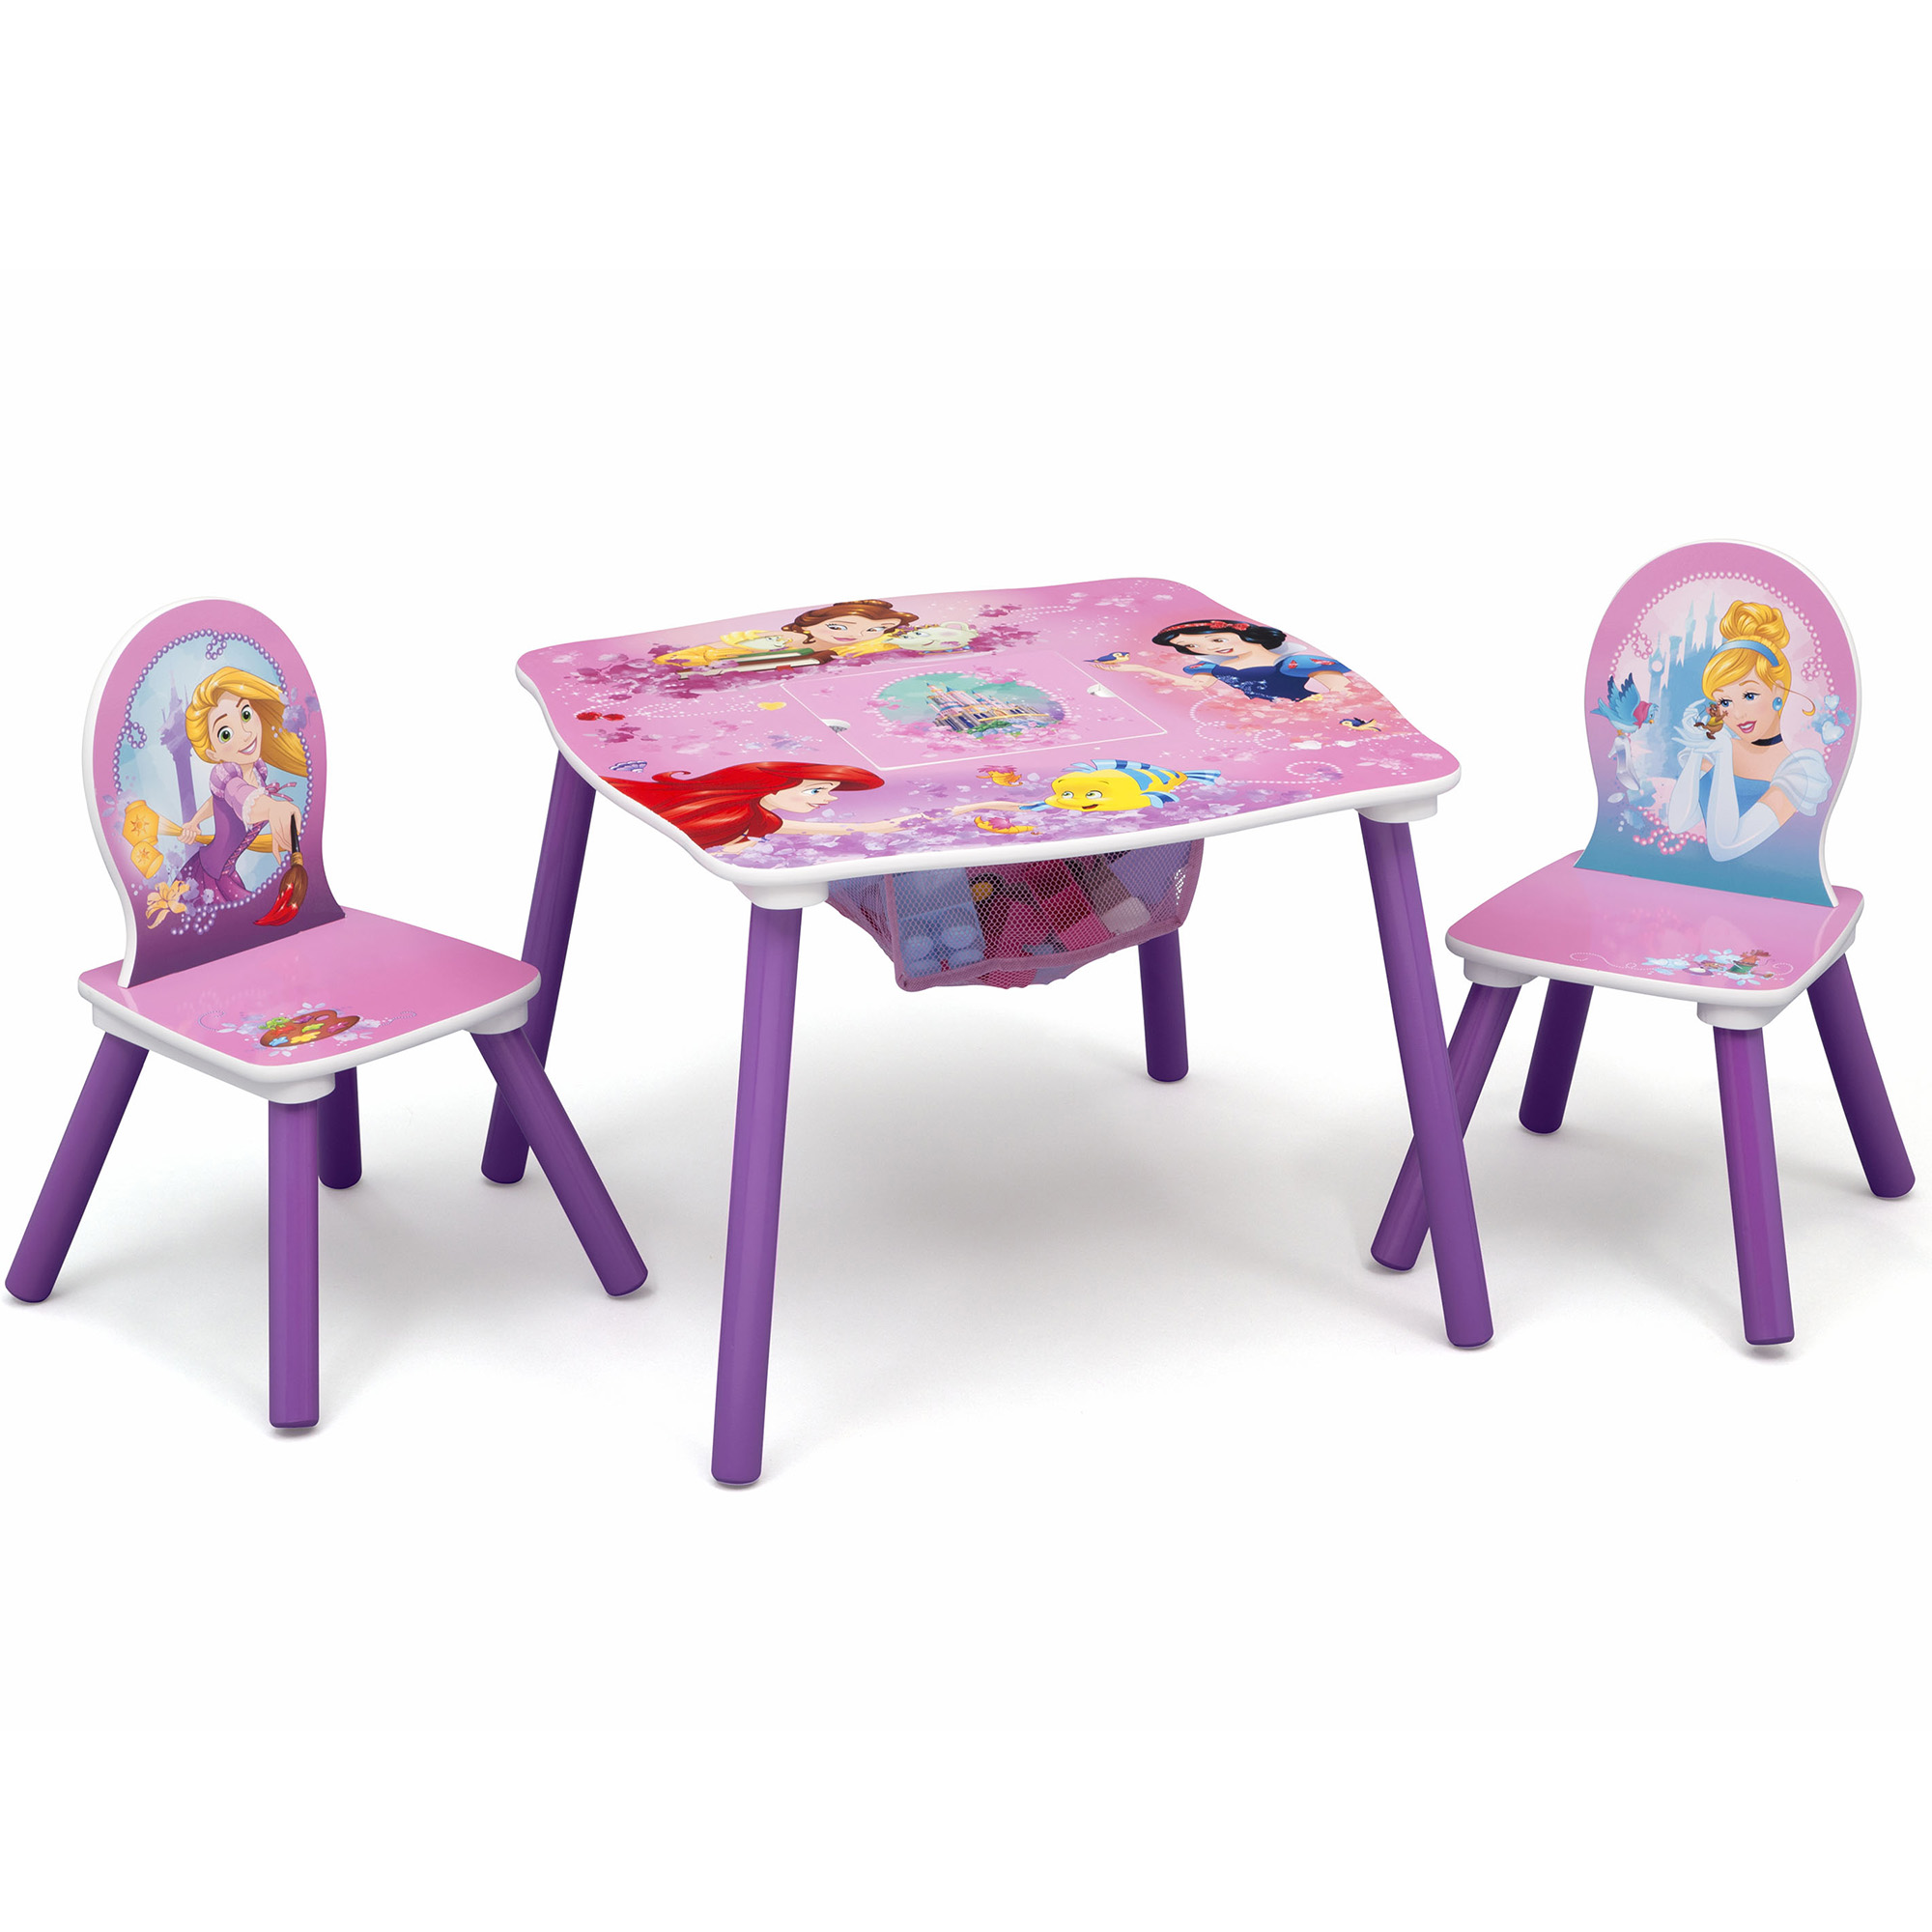 Disney Princess Wood Kids Table and Chair Set with Storage by Delta Children - image 1 of 8